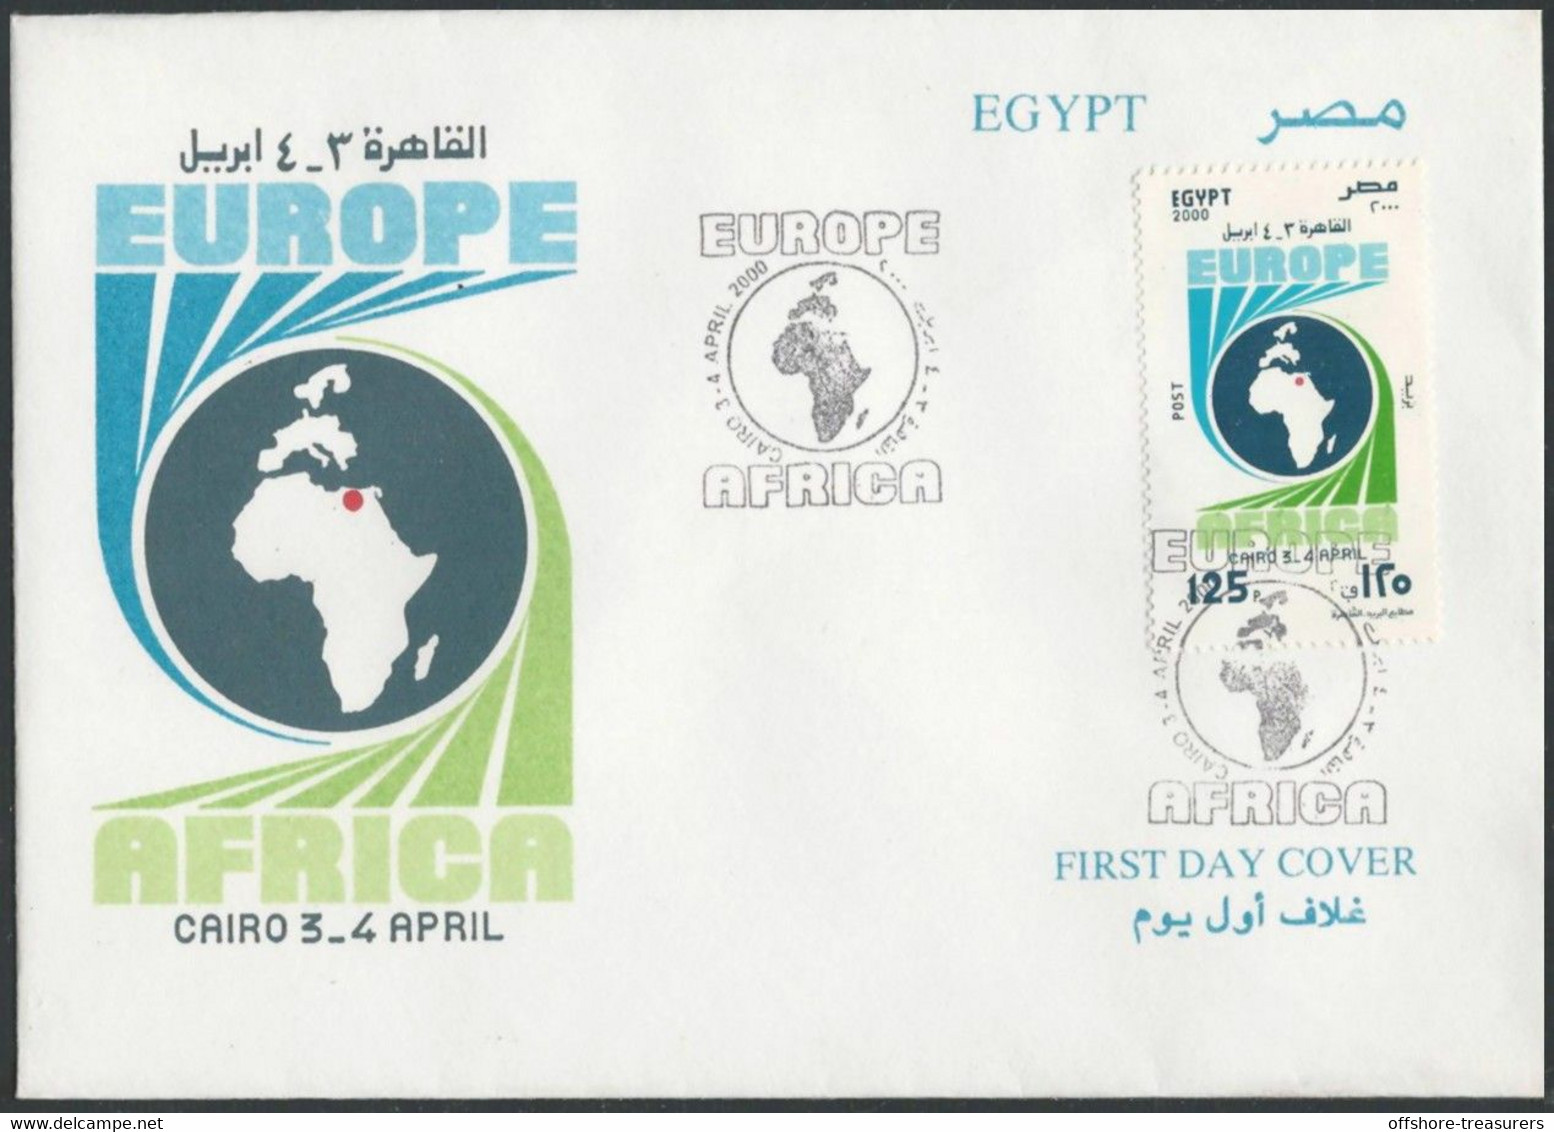 Egypt FDC 2000  First Day Cover Africac-Europe EU Summit / Convention In Cairo 3-4 April 2000 - Covers & Documents